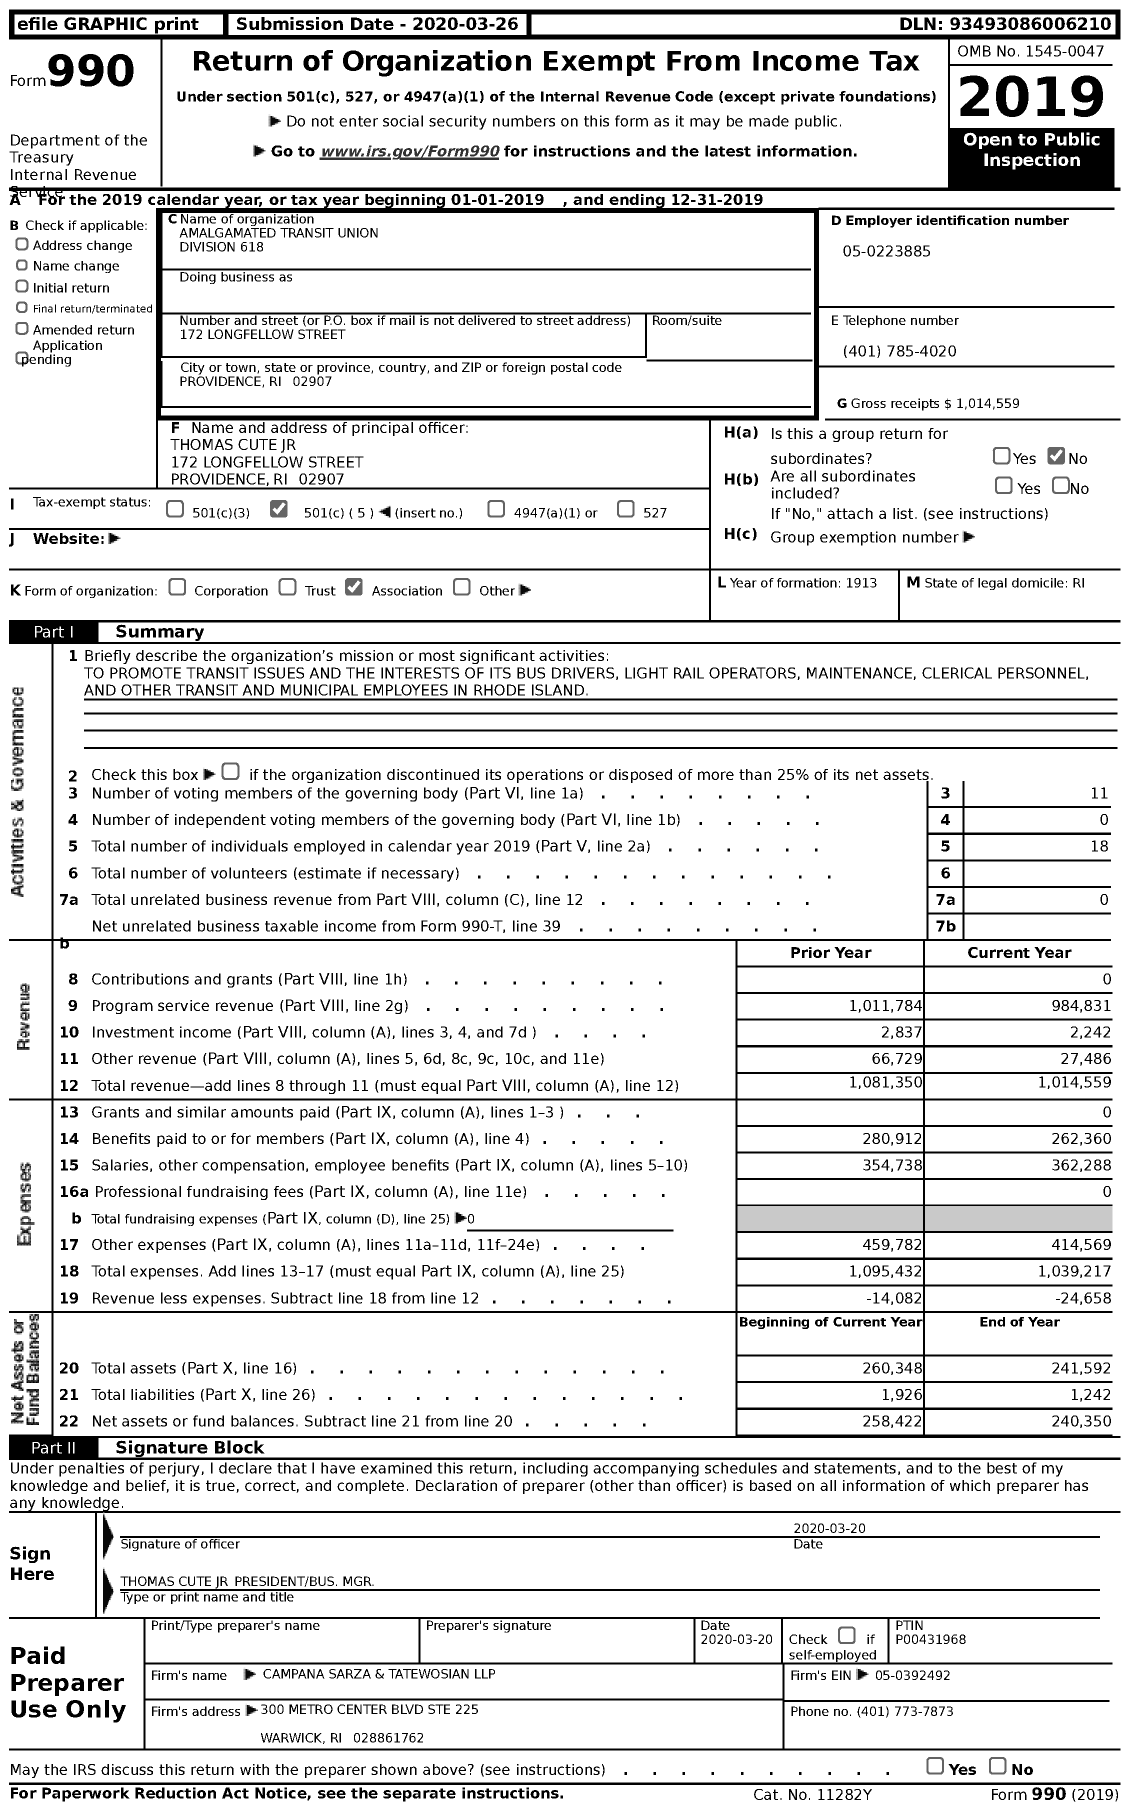 Image of first page of 2019 Form 990 for Amalgamated Transit Union Division 618